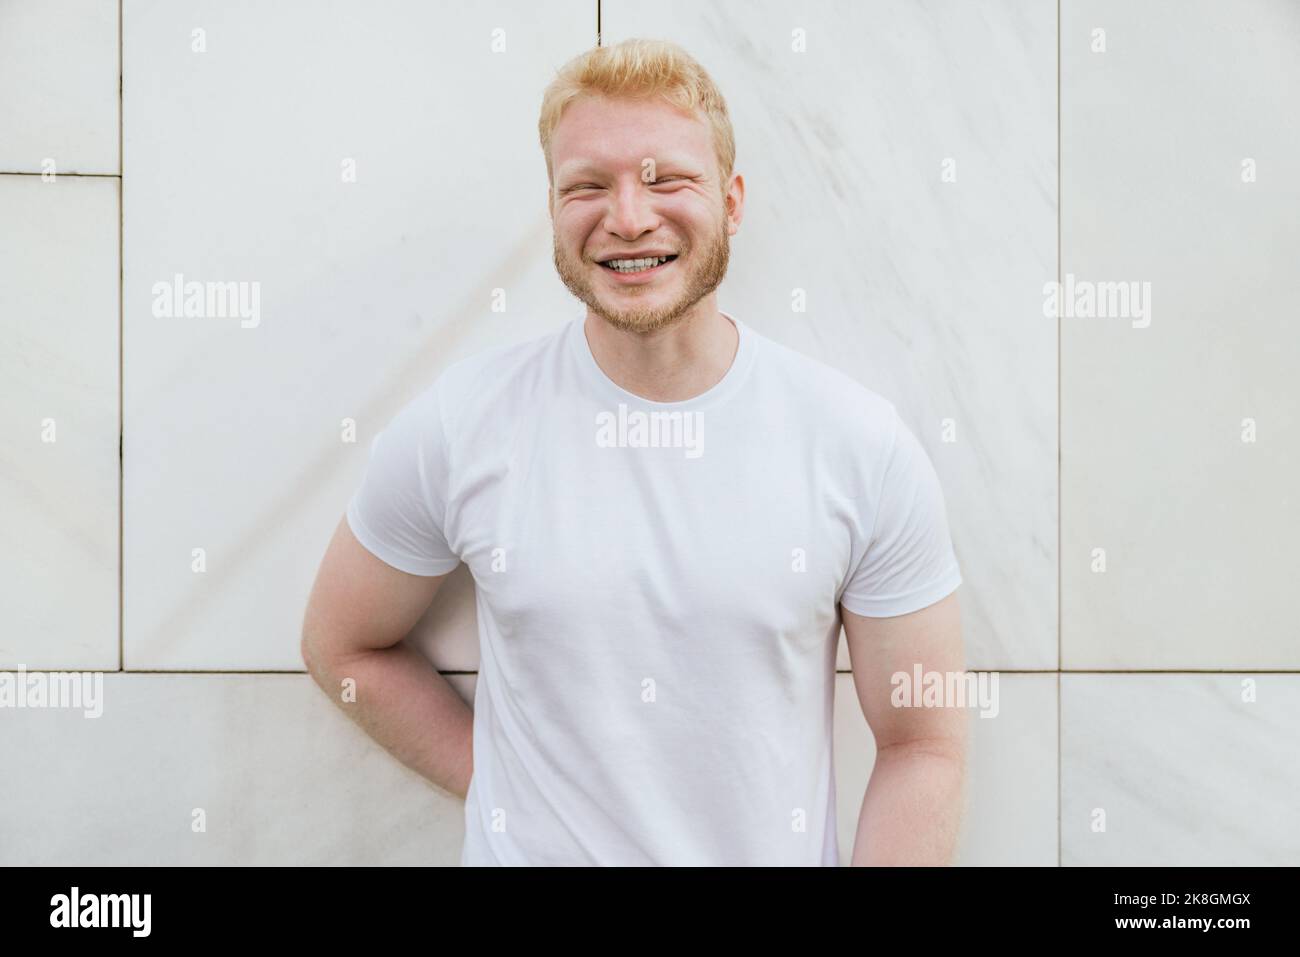 Cheerful bearded adult blond haired man in white t shirt standing near white tiled wall looking at camera Stock Photo